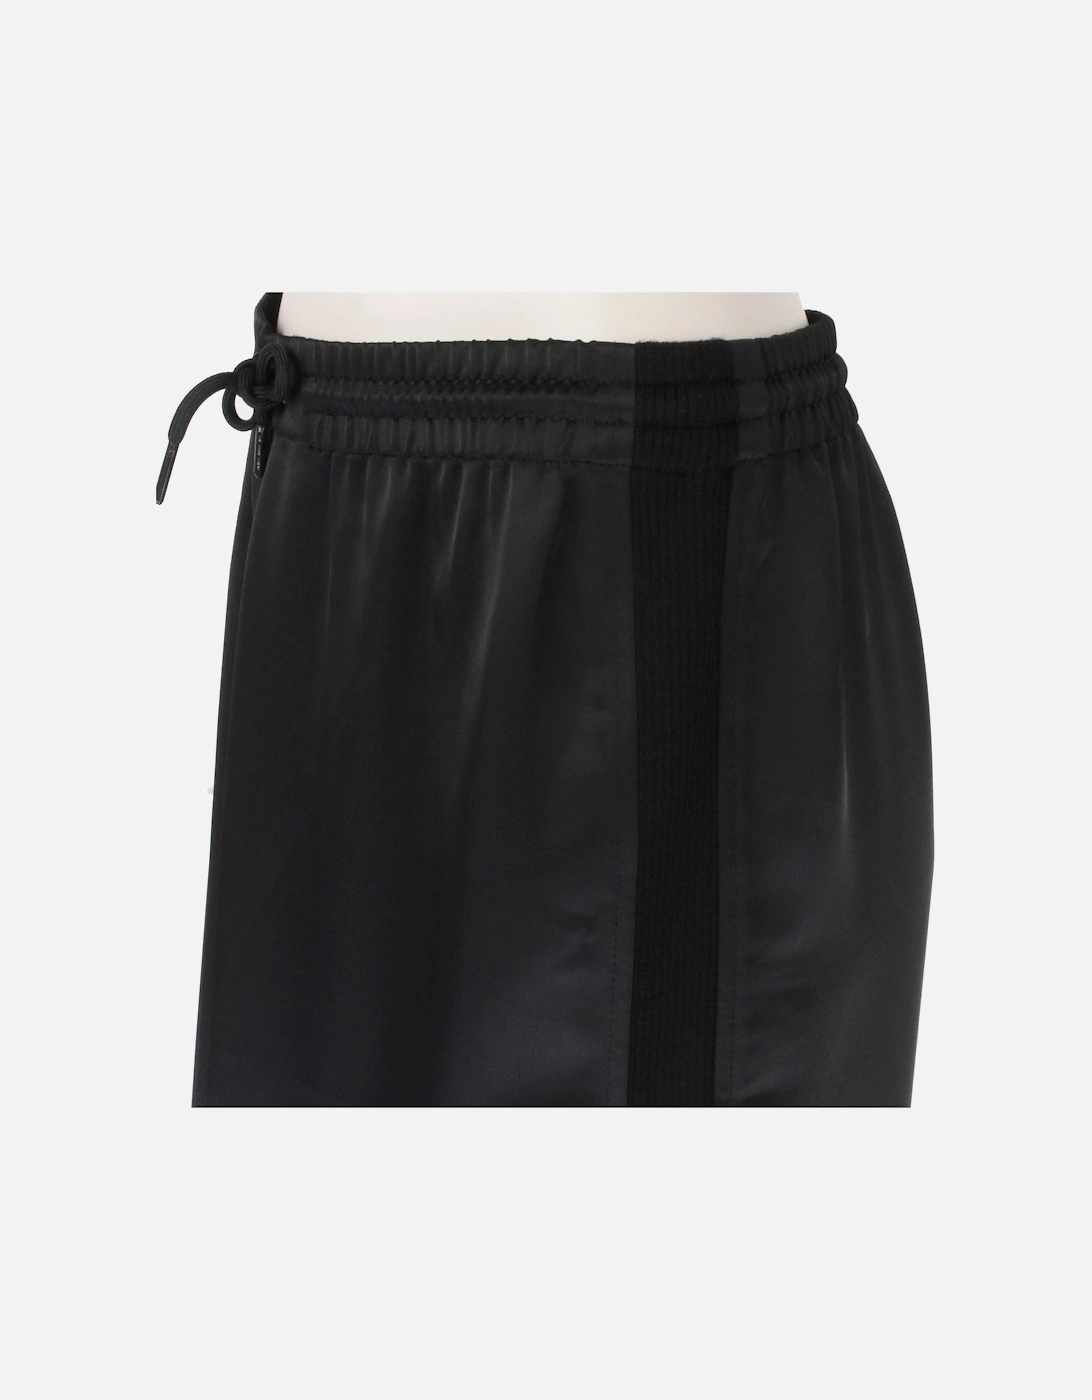 T by Skirt